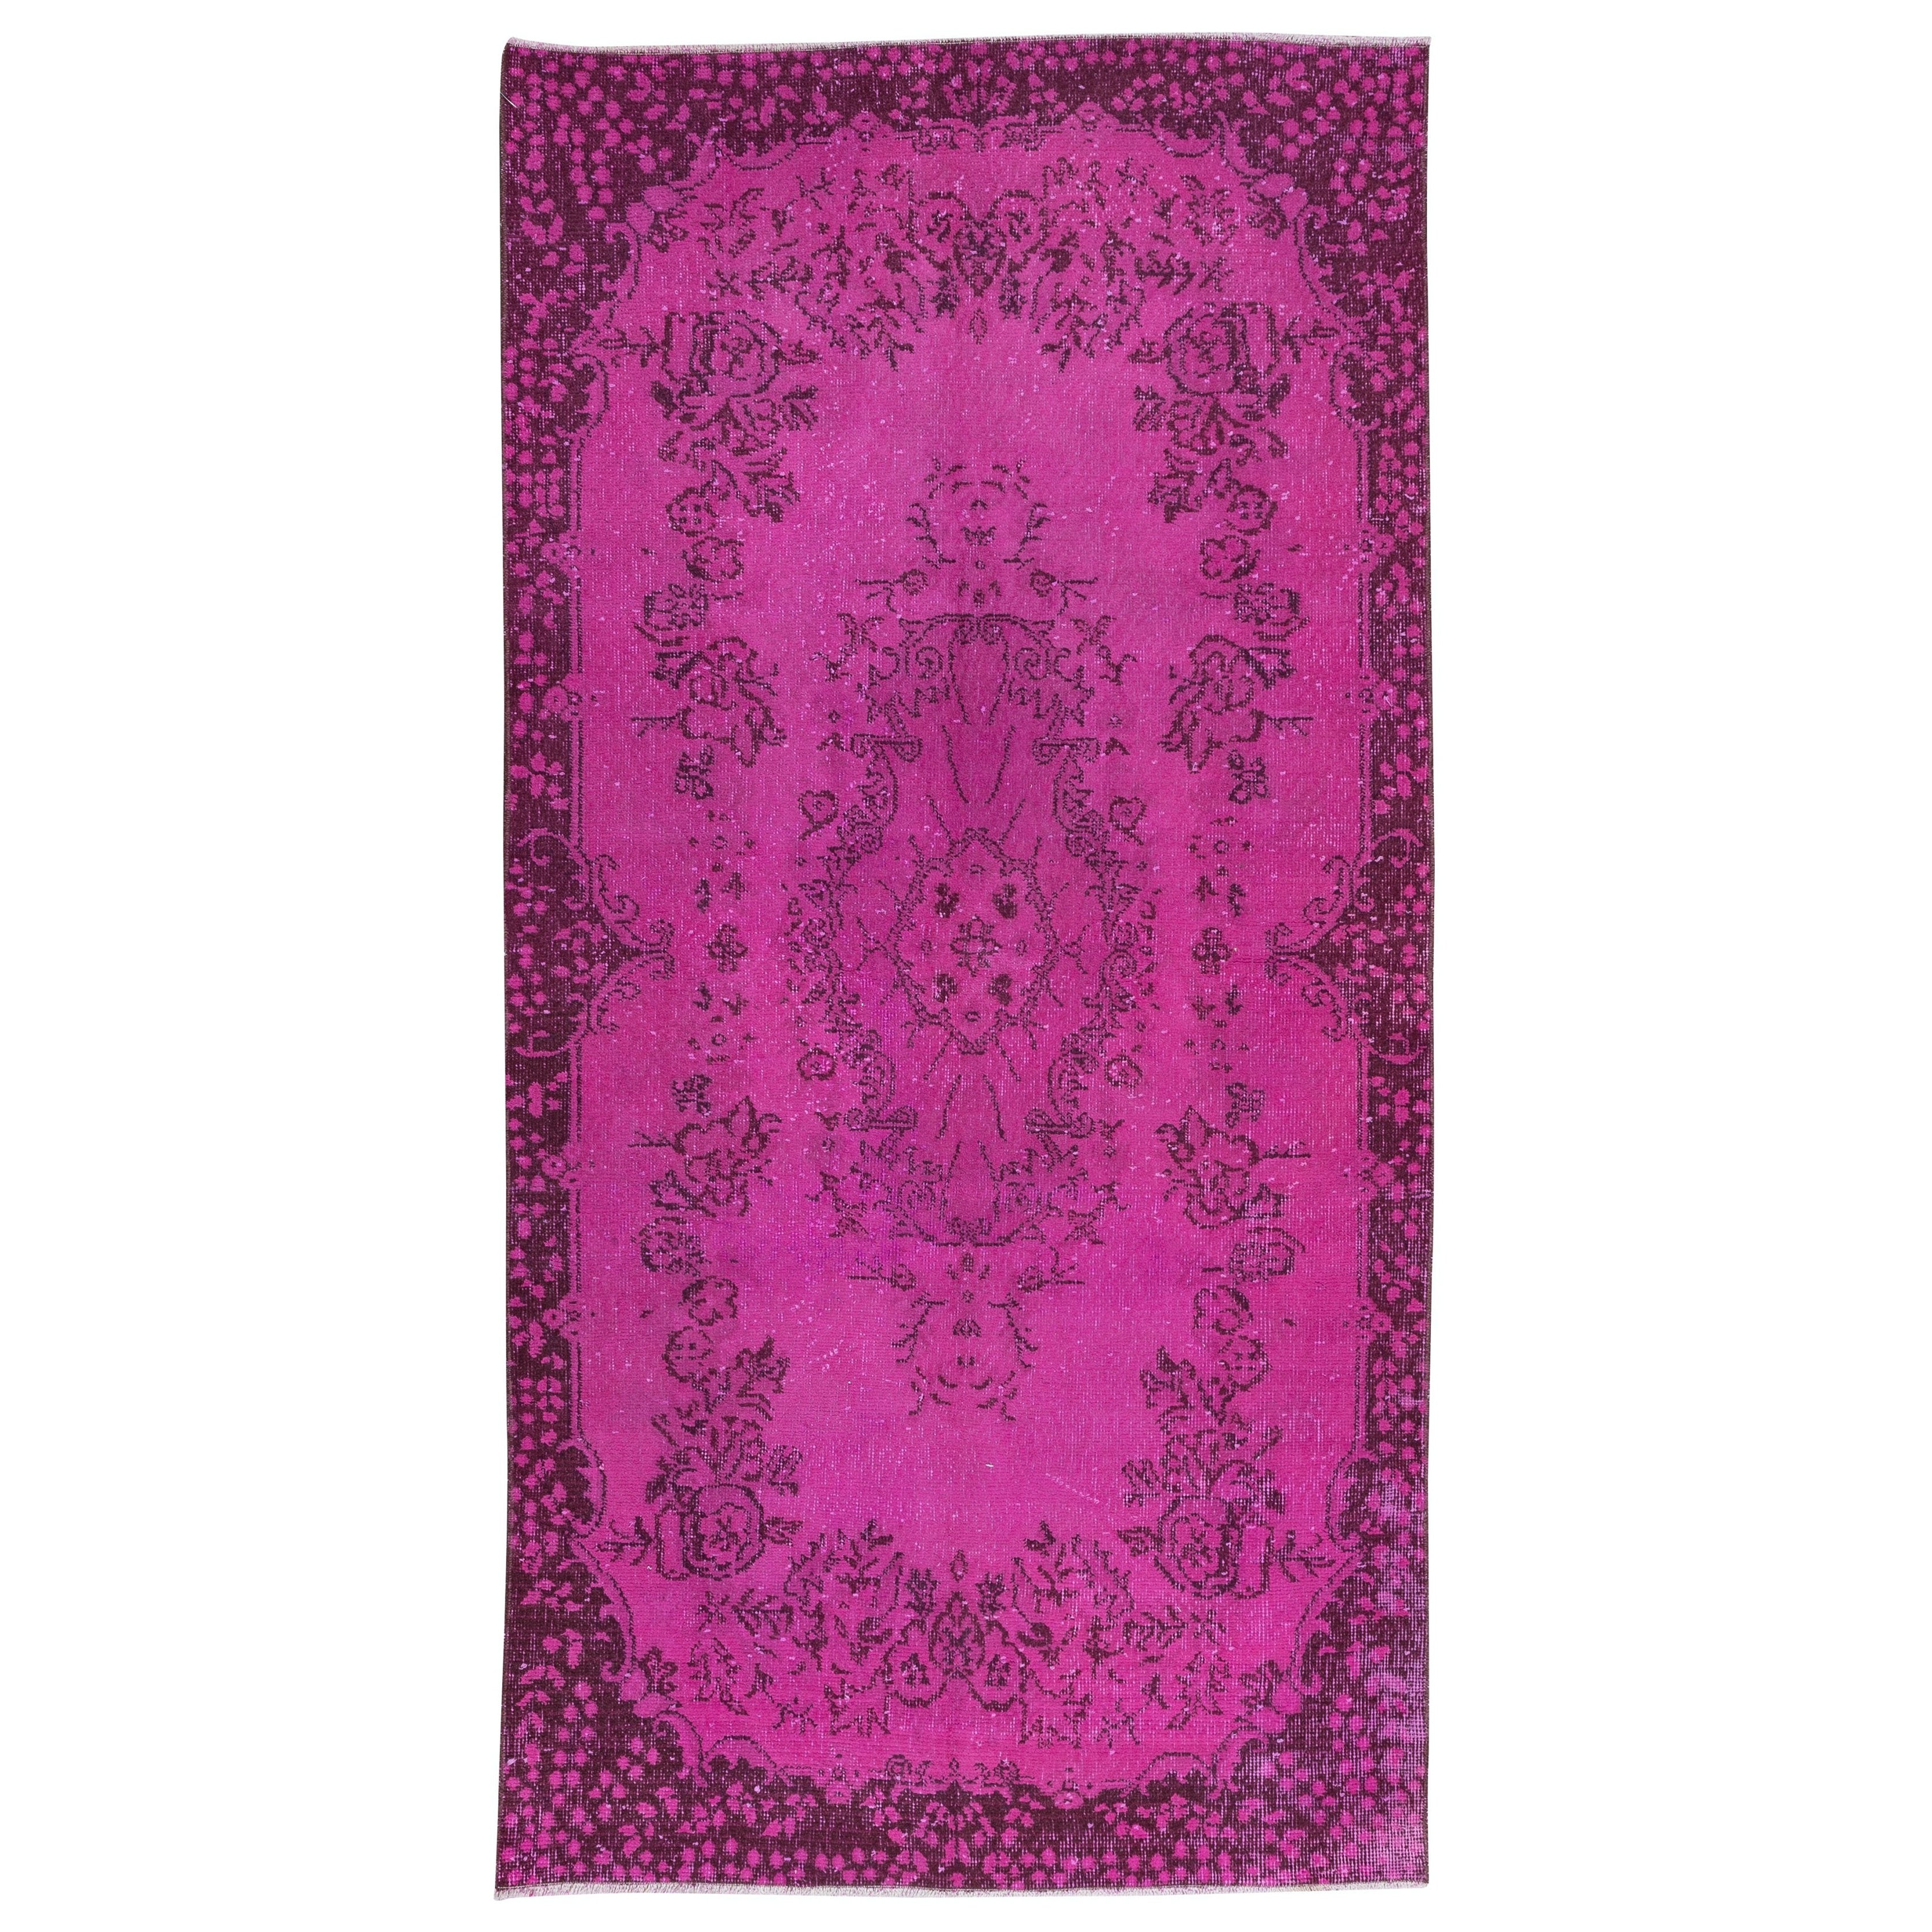 3.8x7.3 Ft Hot Pink Anatolian Wool Rug with Medallion, Modern Handmade Carpet For Sale